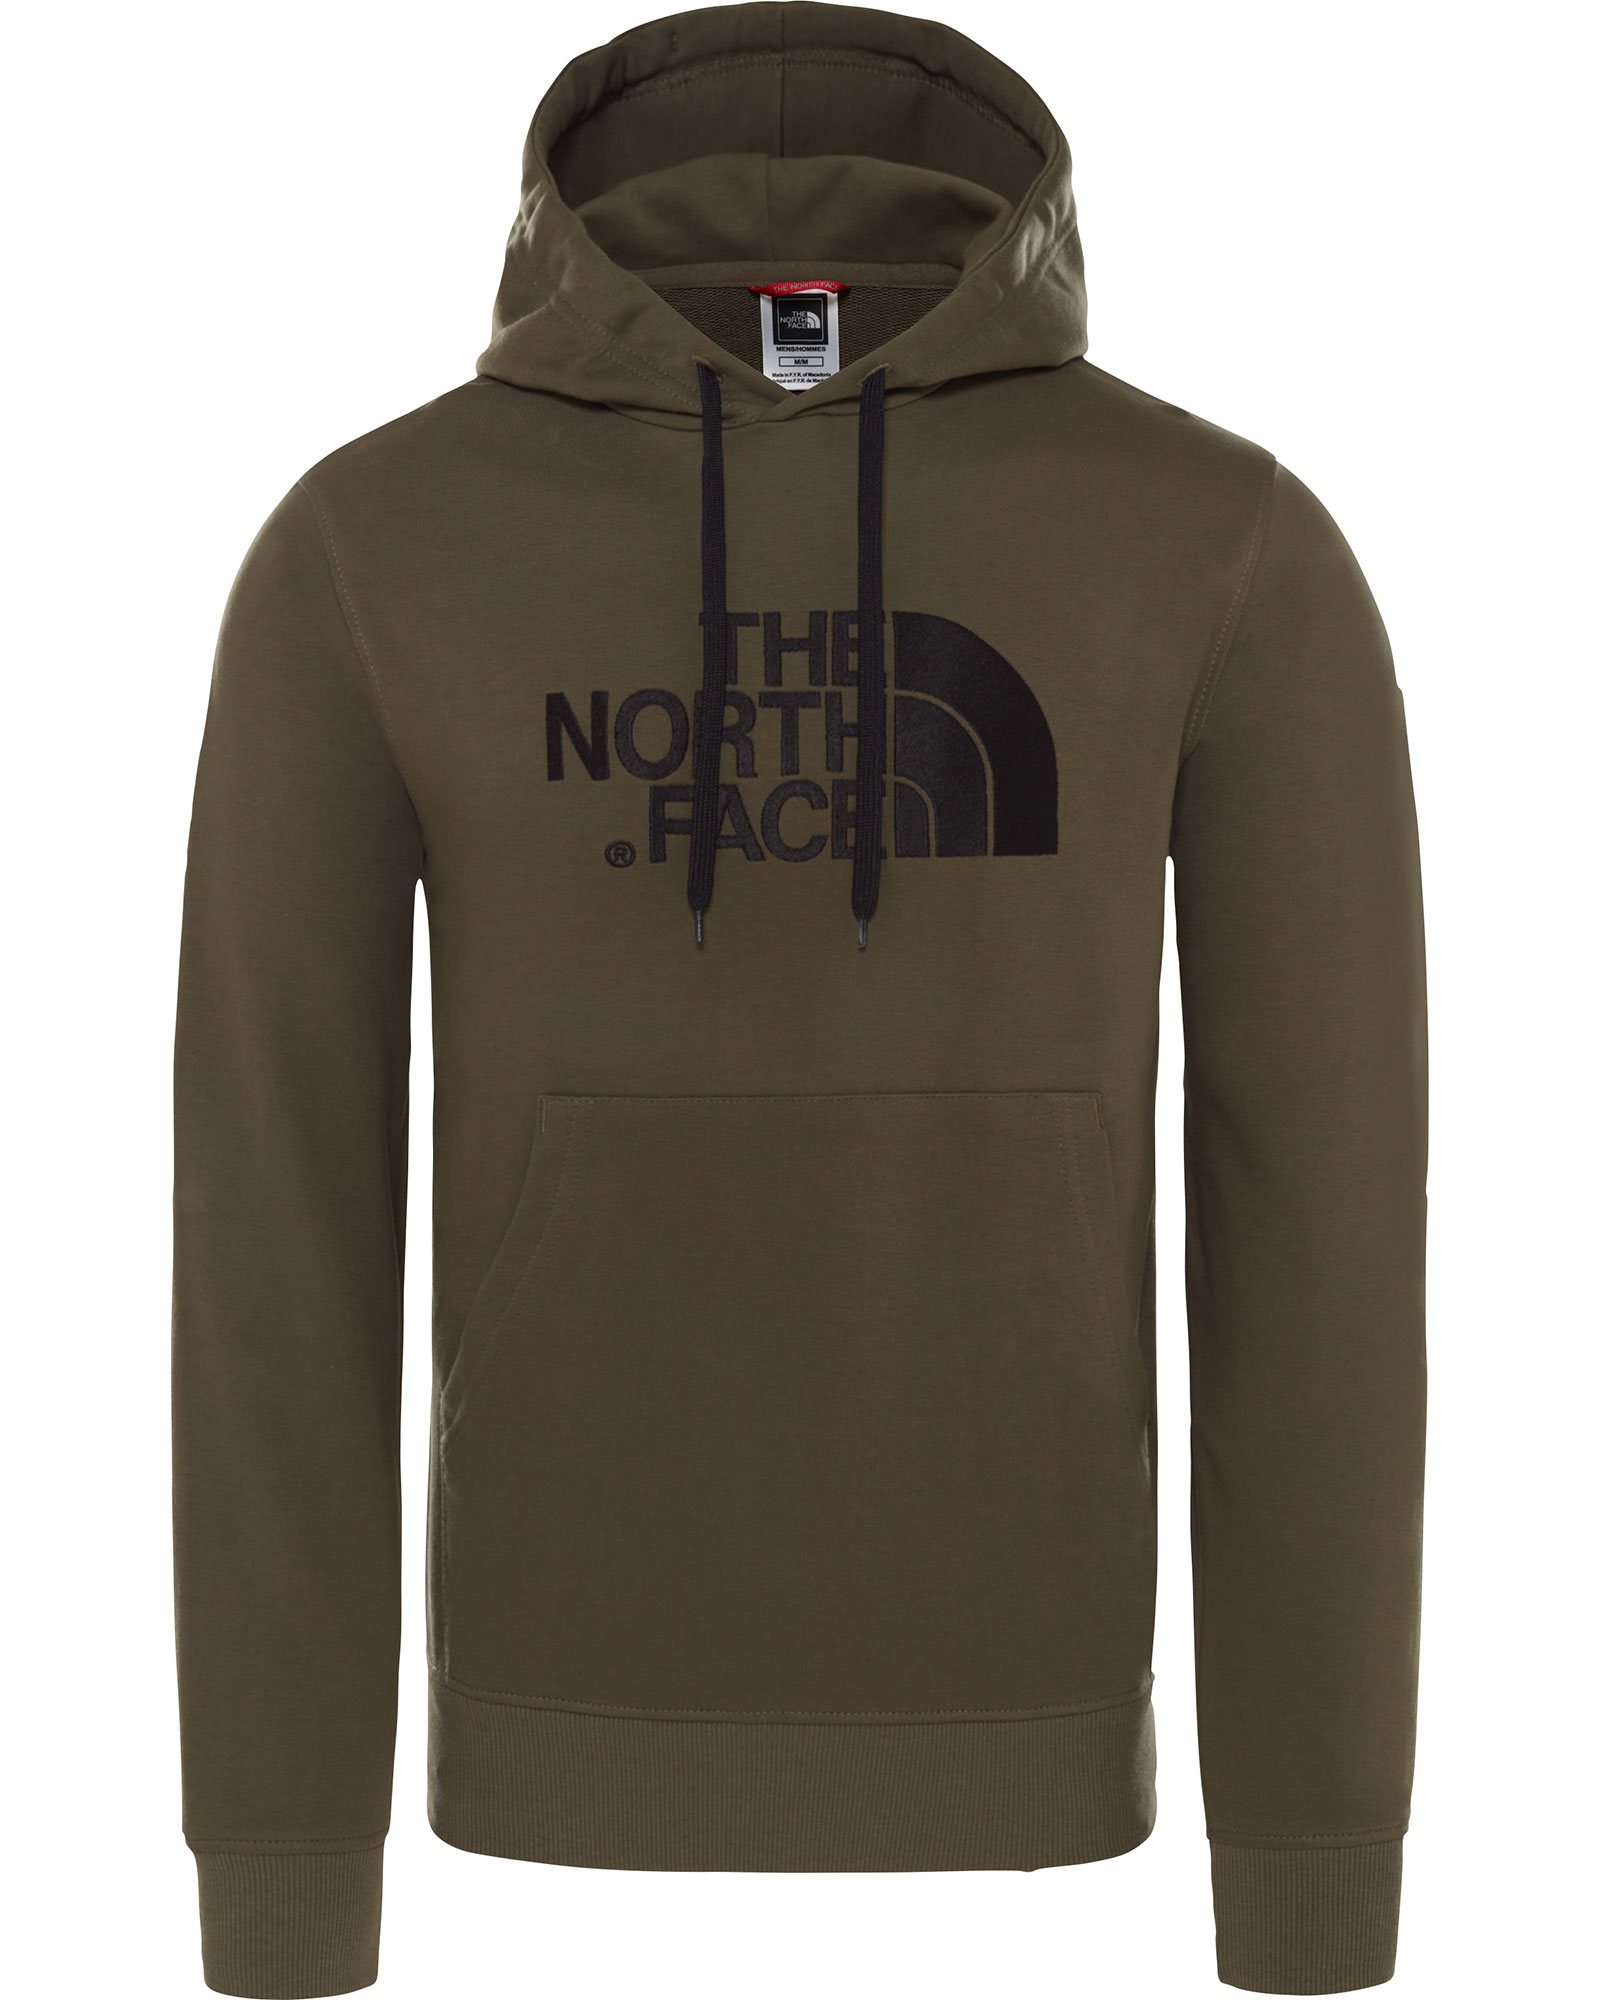 The North Face Men’s Light Drew Peak Pullover Hoodie - New Taupe Green XL